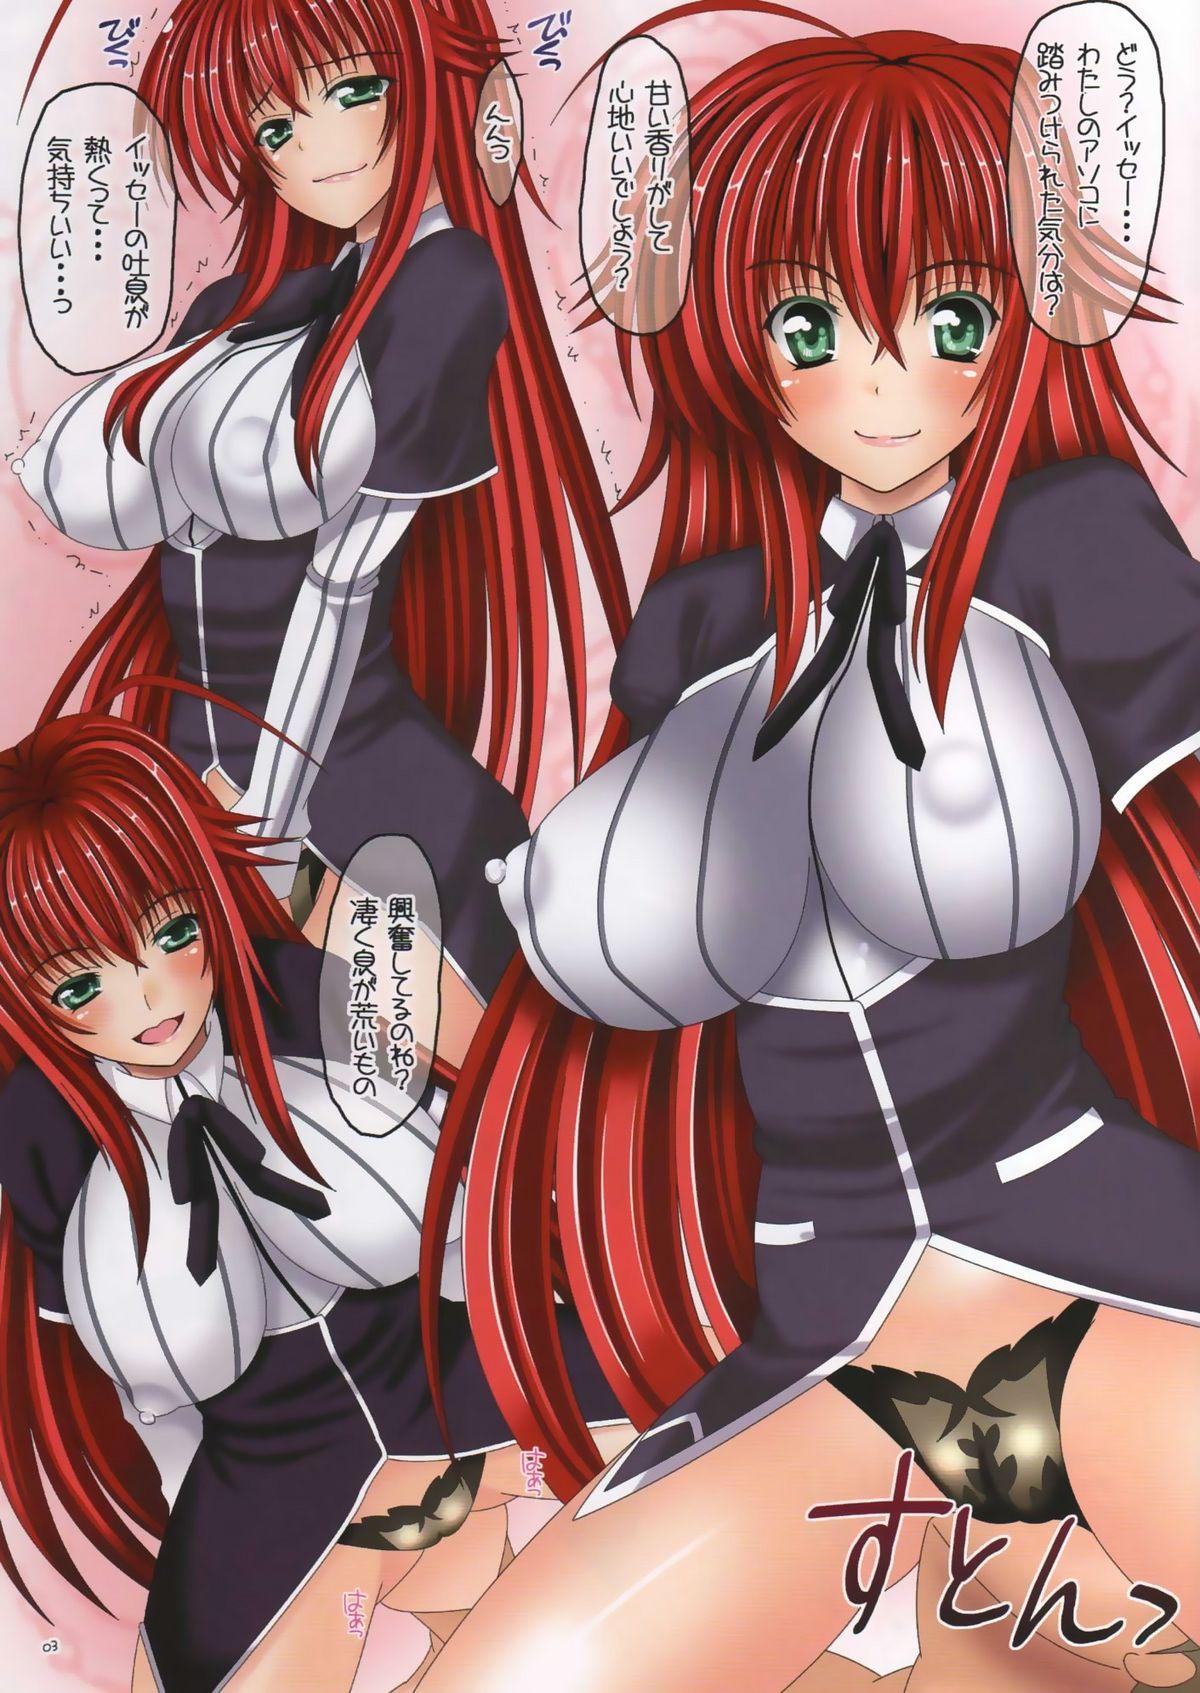 Thong Colorful DxD - Highschool dxd Beurette - Page 2